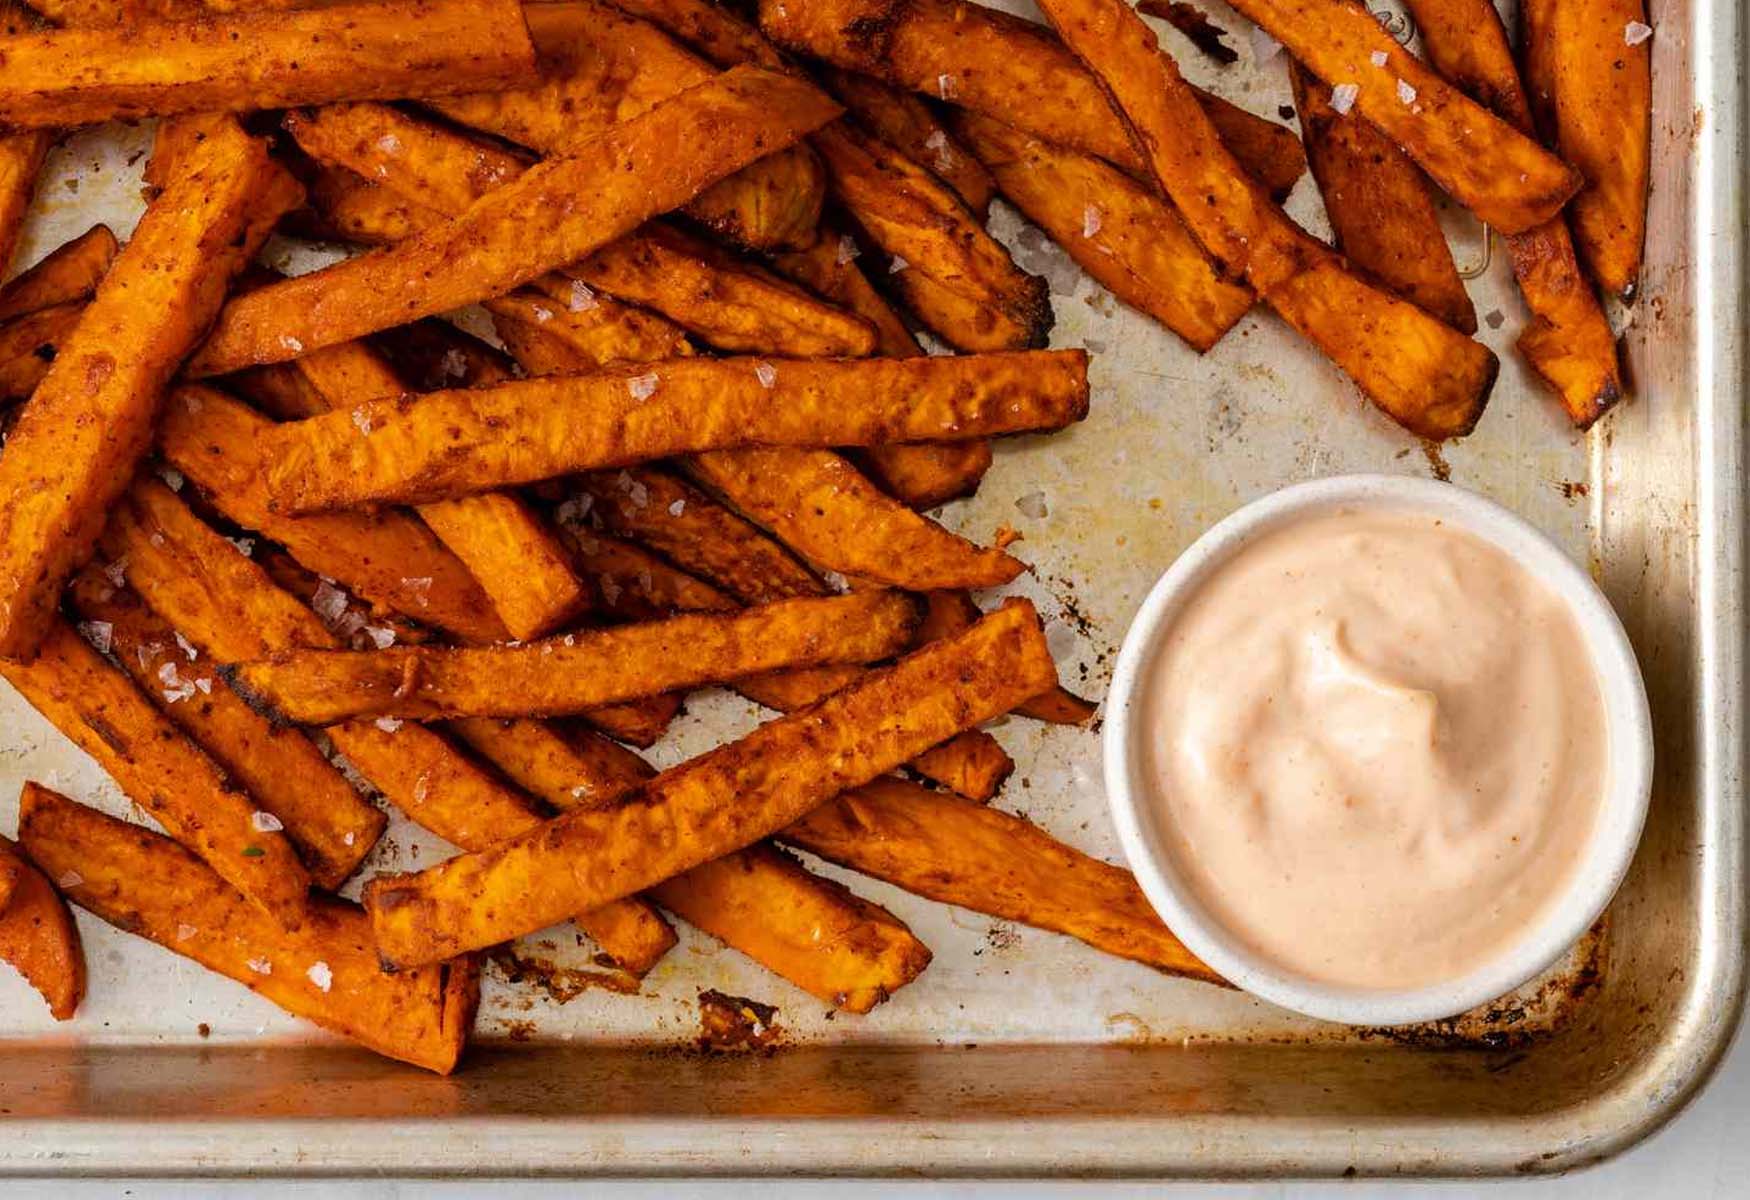 20-nutrition-facts-for-sweet-potato-fries